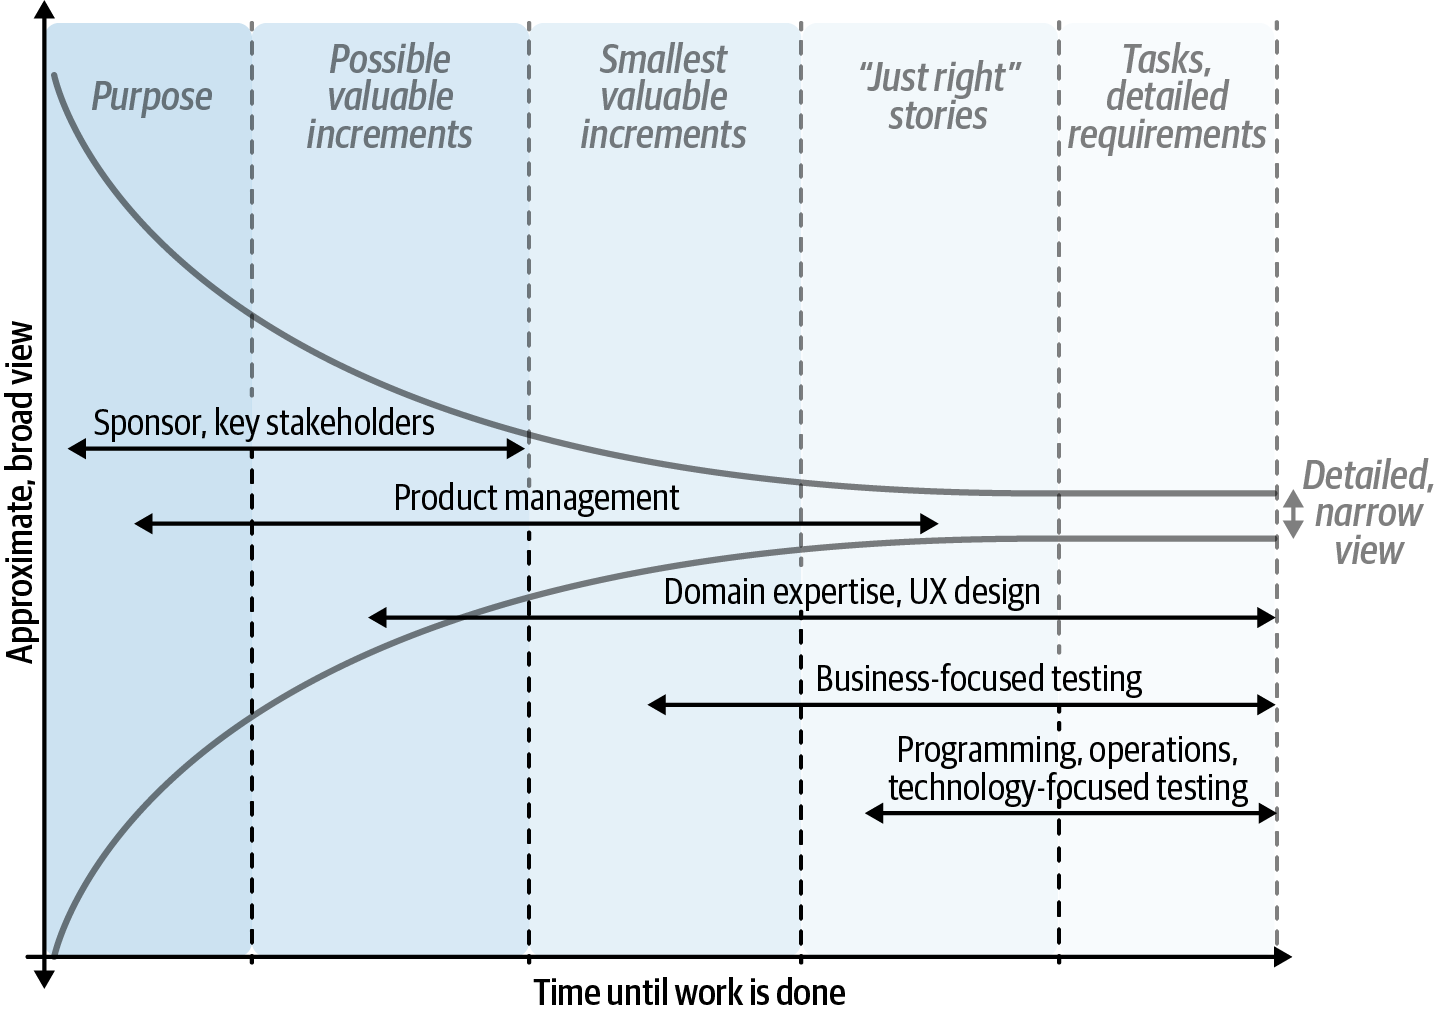 This chart shows the same image as the “planning horizons” figure, except the funnel and regions are in the background. The names of several skills are overlaid on the funnel, with arrows showing which regions the skills apply to. From left to right, they are: “sponsor and key stakeholders,” which overlays the “purpose” and “possible valuable increments” regions; “product management,“ which overlays “purpose” (partially); “possible valuable increments,” “smallest valuable increments,” and “‘just right’ stories” (partially); “domain expertise and UX design,” which overlays “possible valuable increments” (partially), “smallest valuable increments,” “‘just right’ stories,” and “tasks and detailed requirements”; “business-focused testing,” which overlays “smallest valuable increments (partially), “‘just right’ stories,” and “tasks and detailed requirements”; and finally “programming, operations, and technology-focused testing,” which overlays “smallest valuable increments” (slightly), “‘just right’ stories,” and “tasks and detailed requirements.”